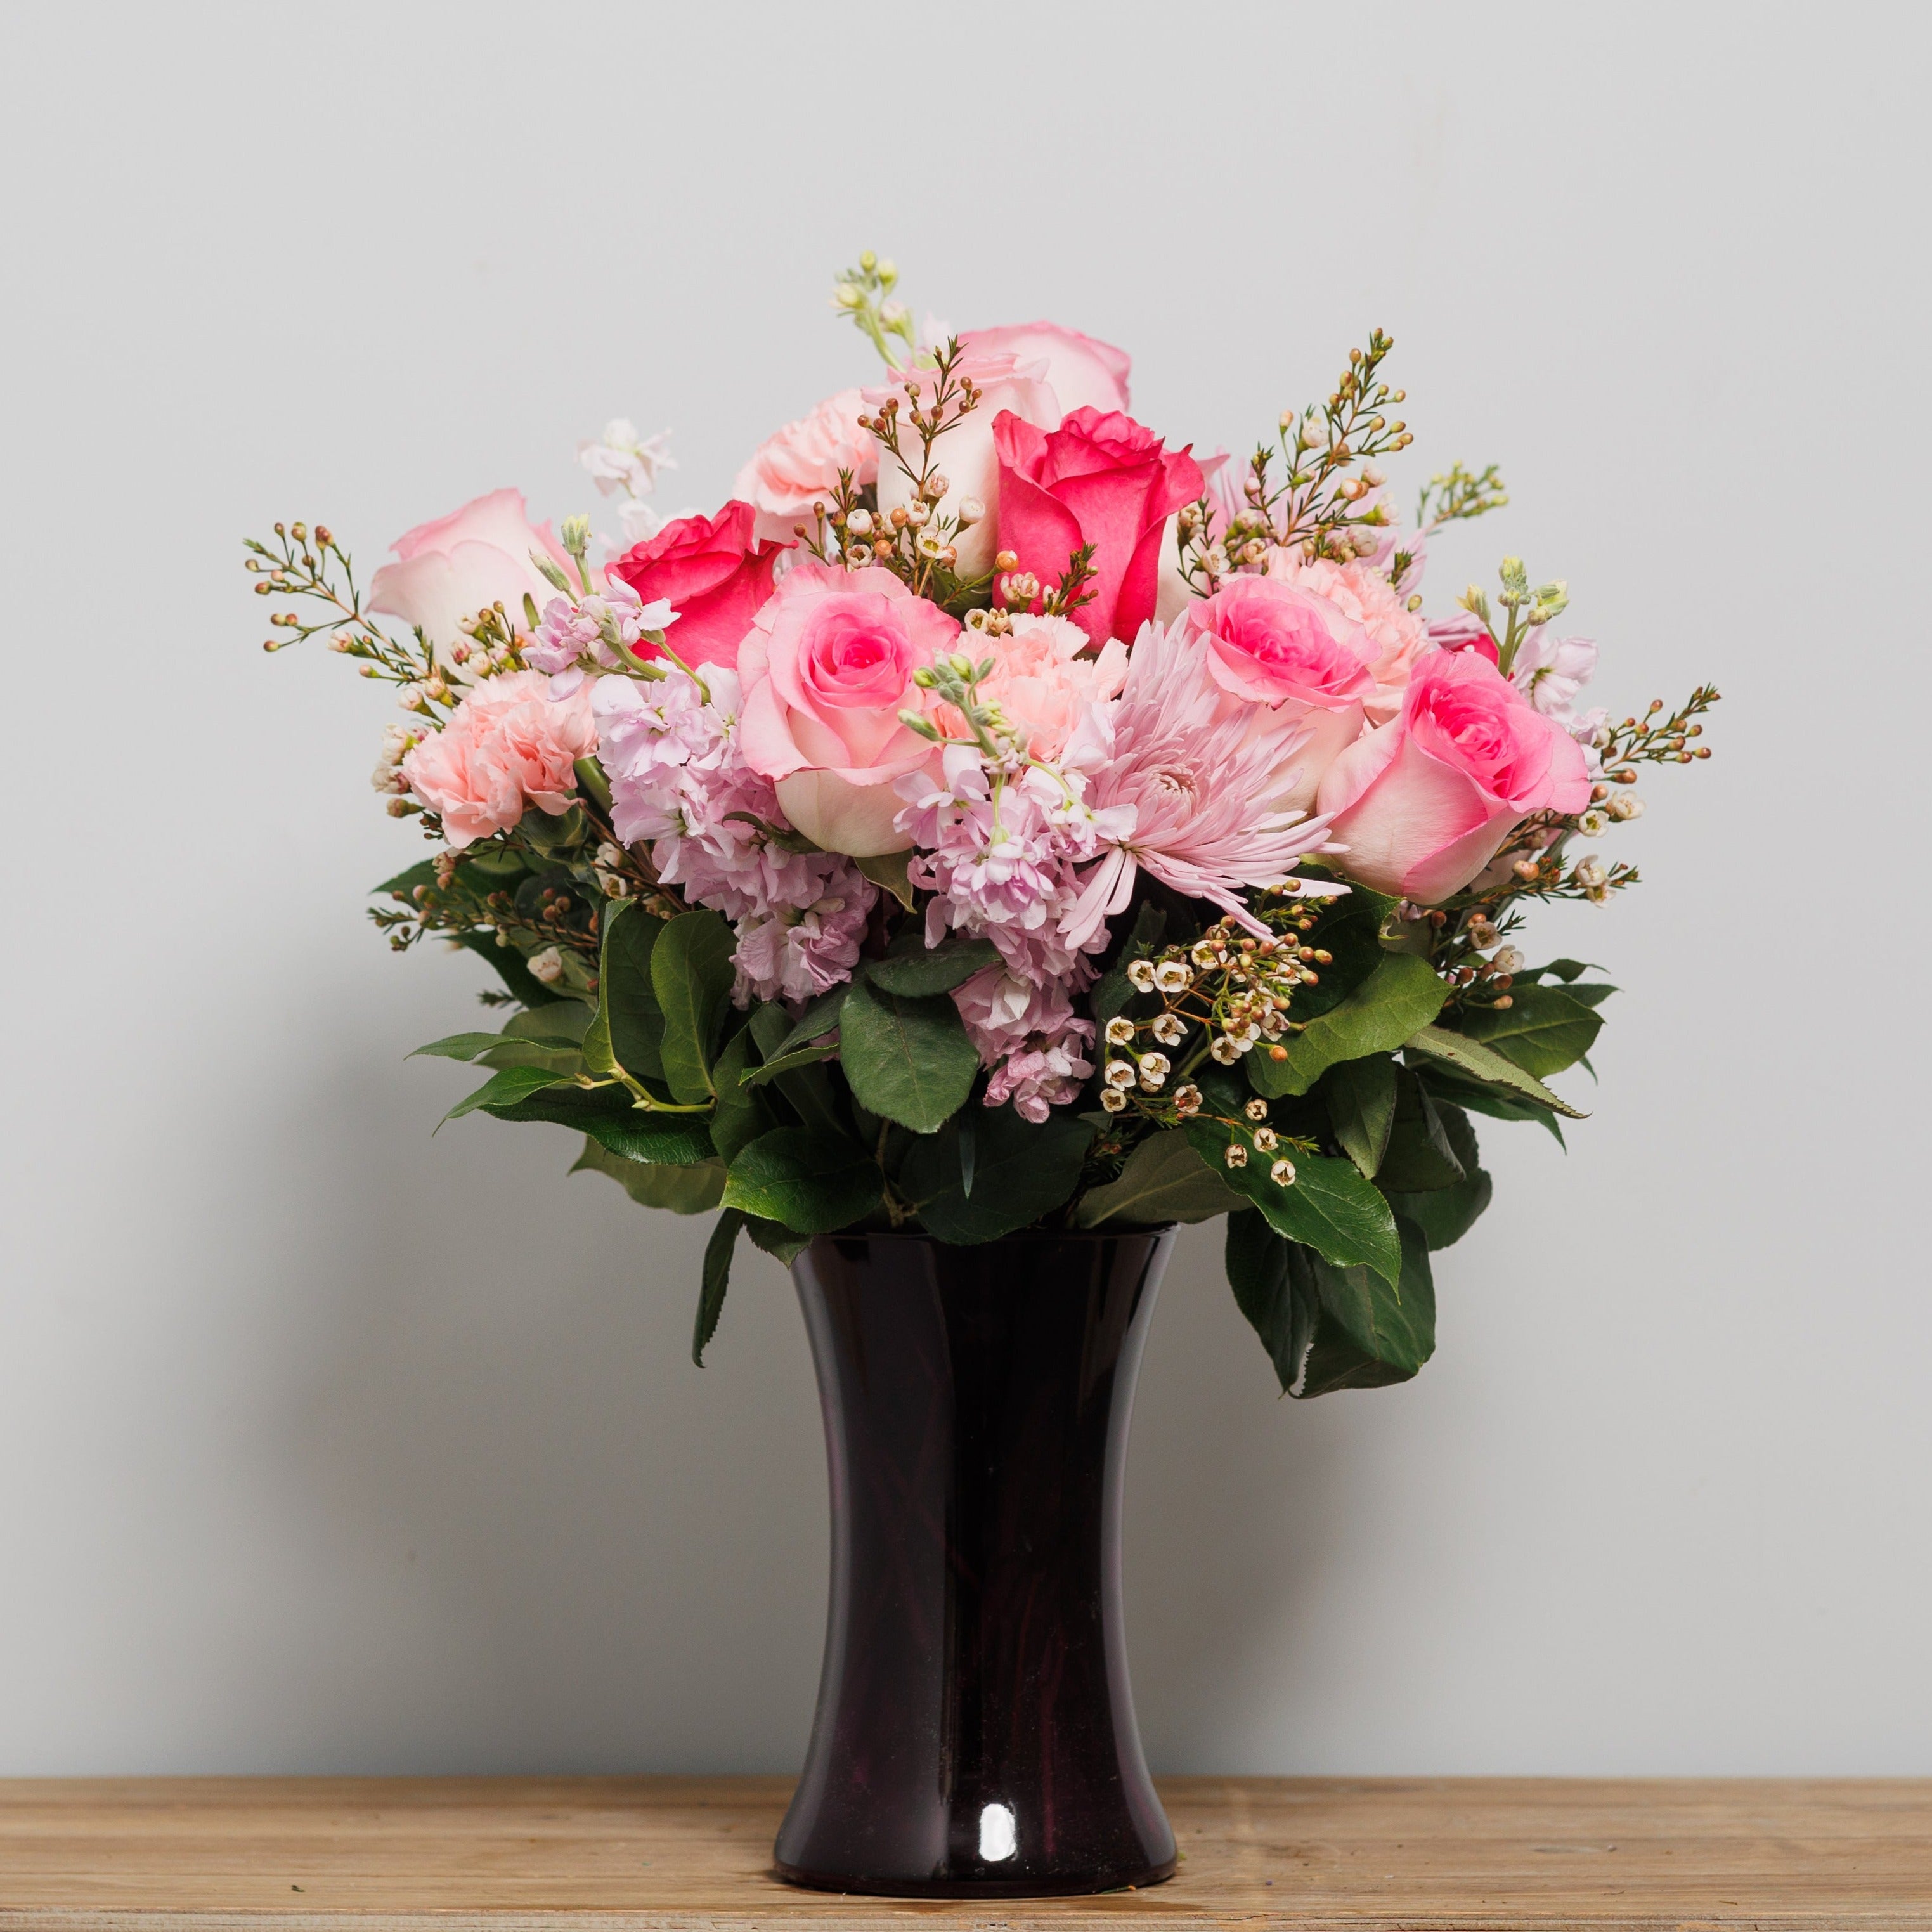 A dozen pink roses with pink carnations and pink stock.